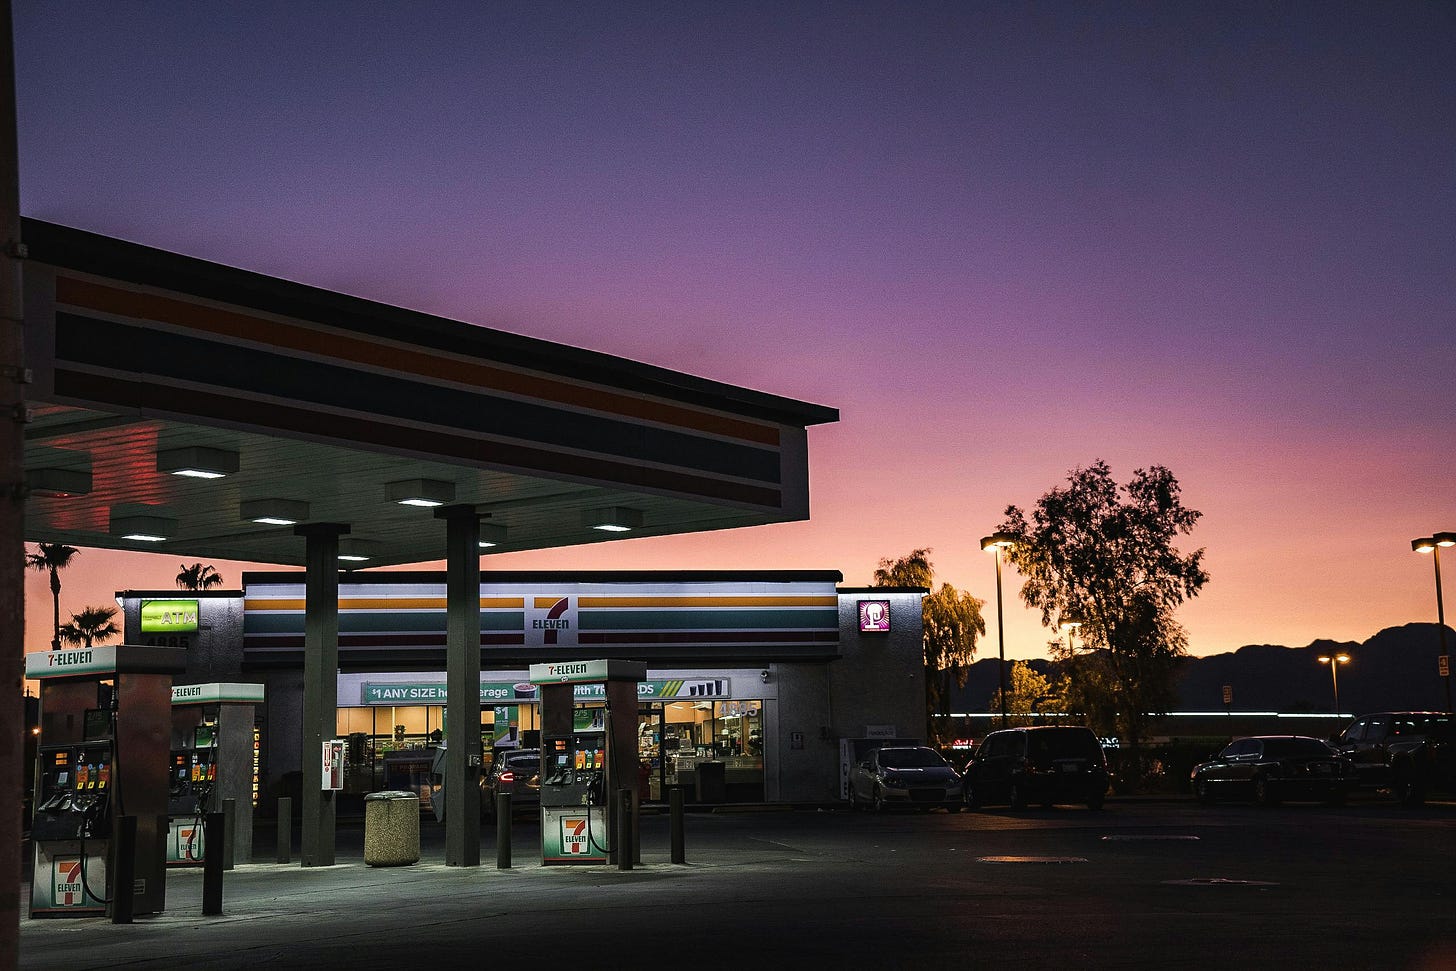 Gas station with 7-11